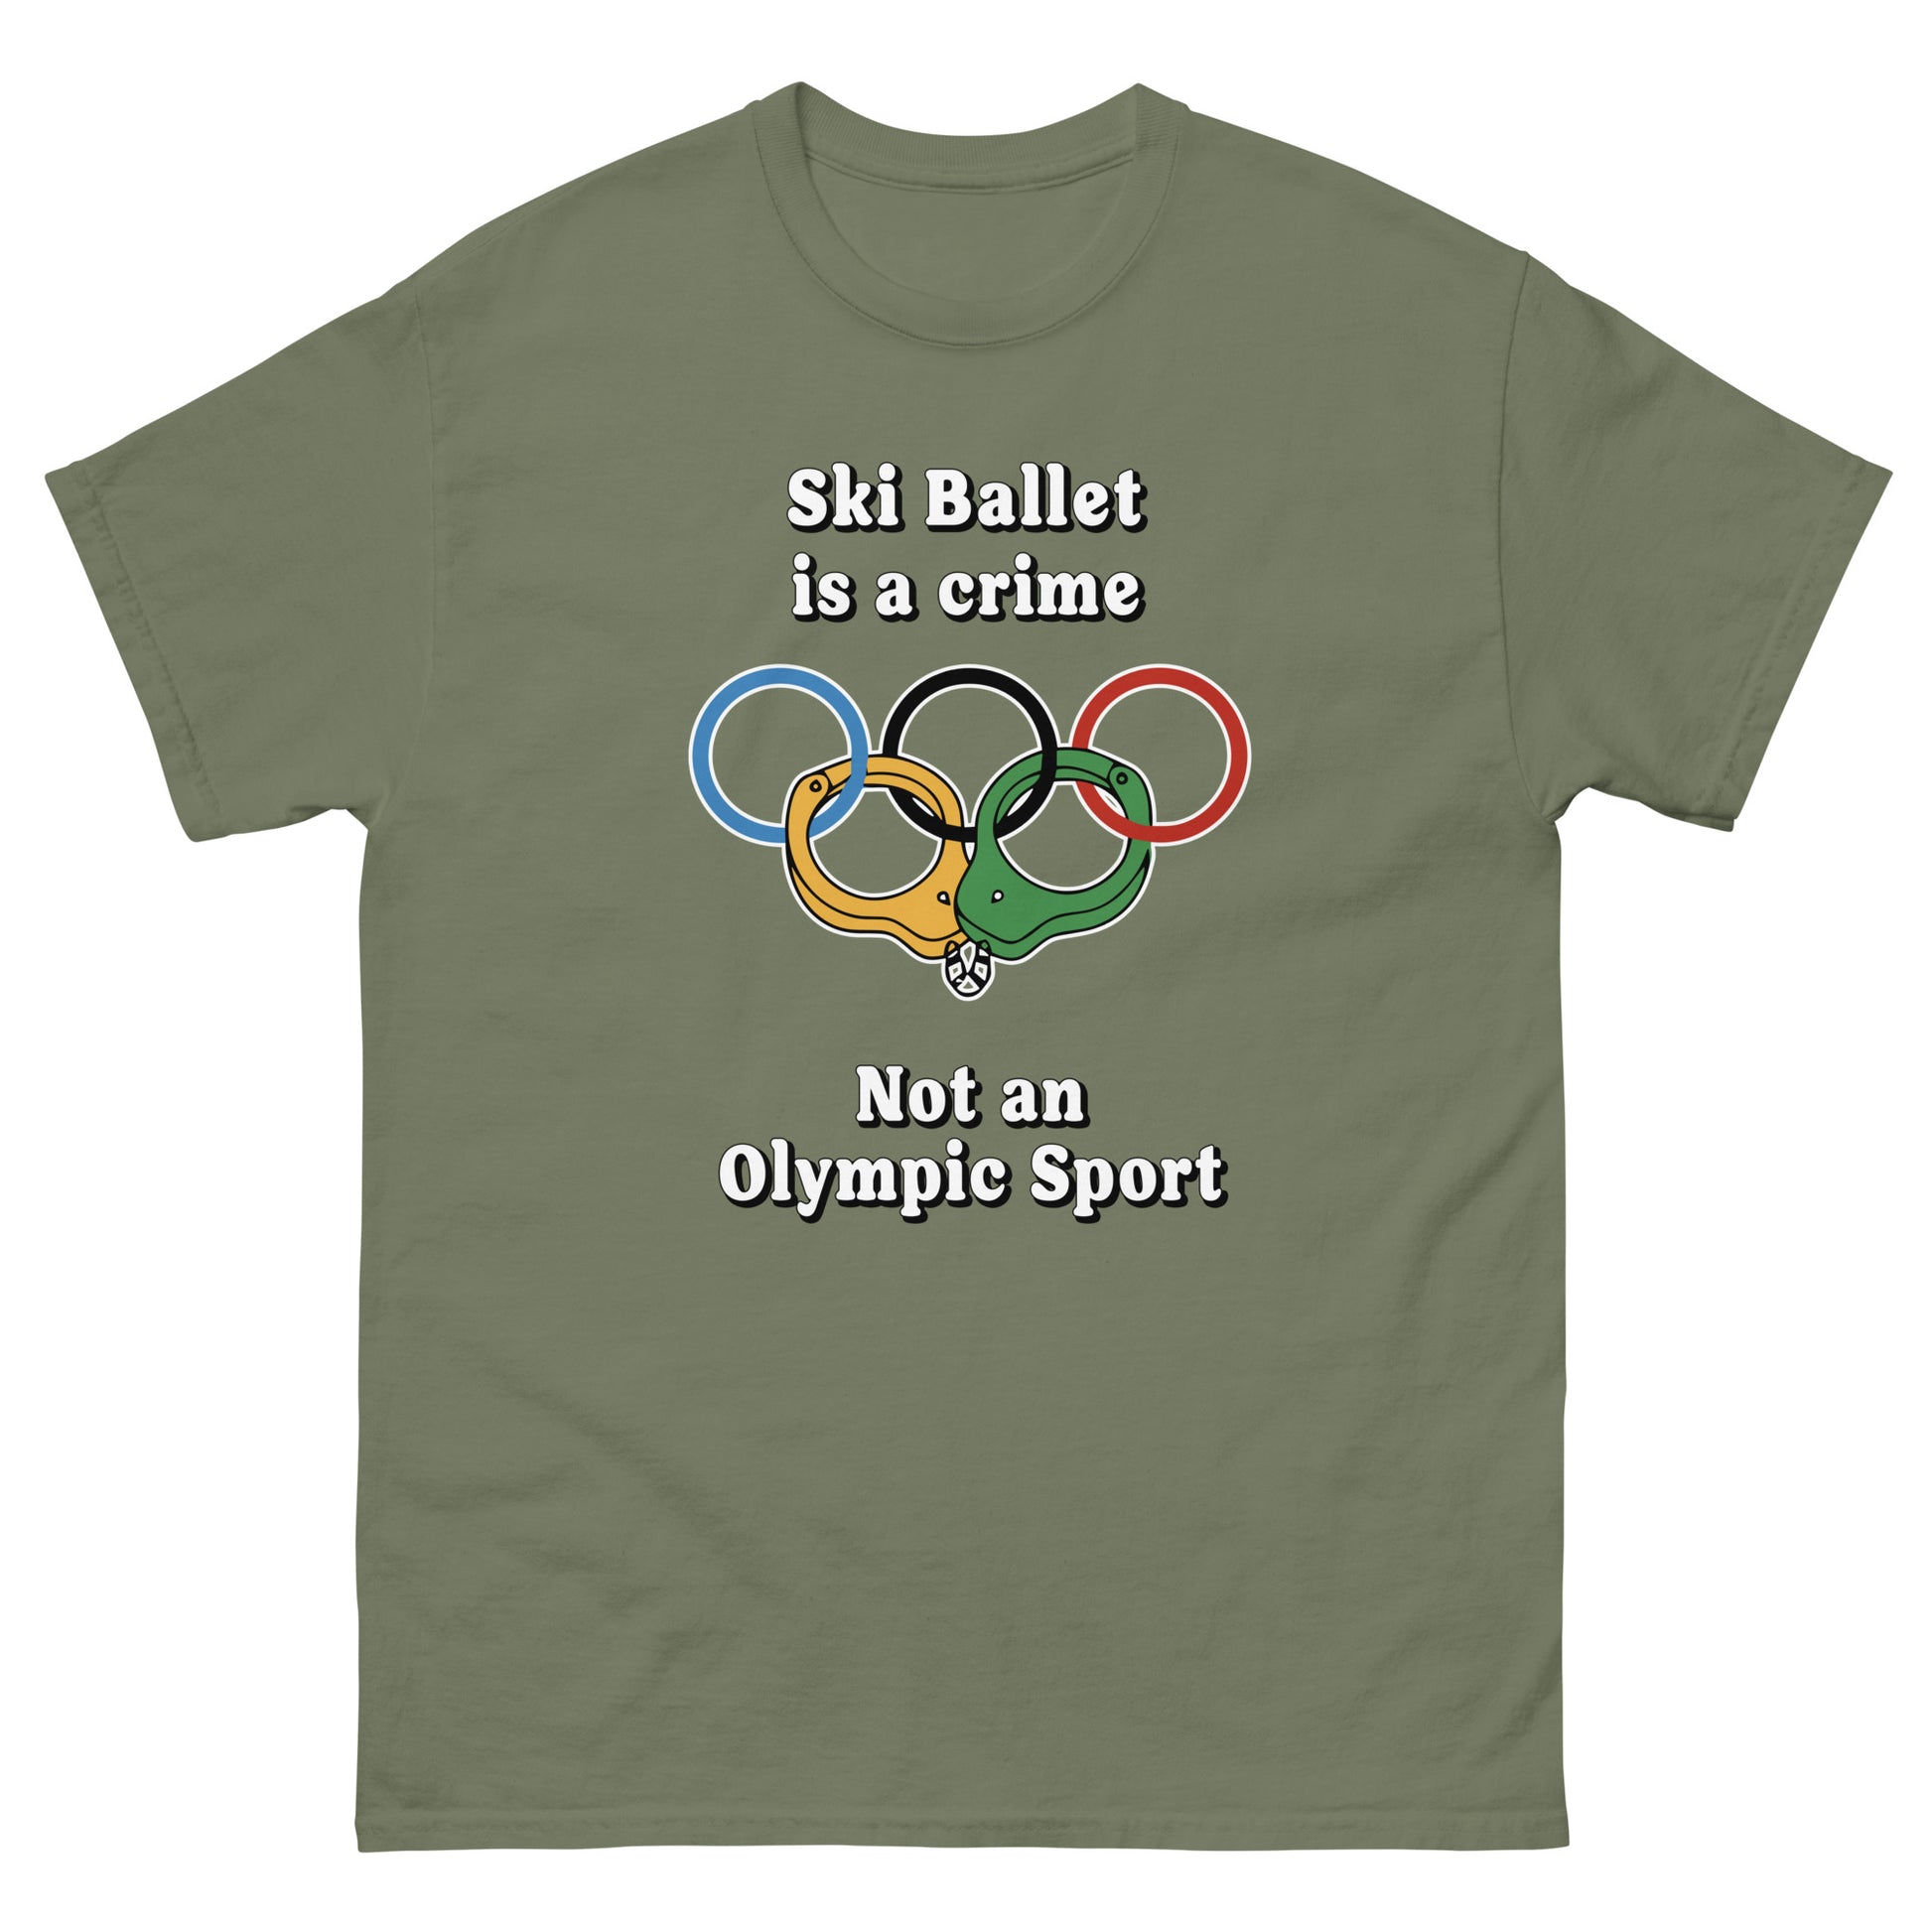 Ski Ballet is a crime not an olympic sport design printed on t-shirt by Whistler Shirts